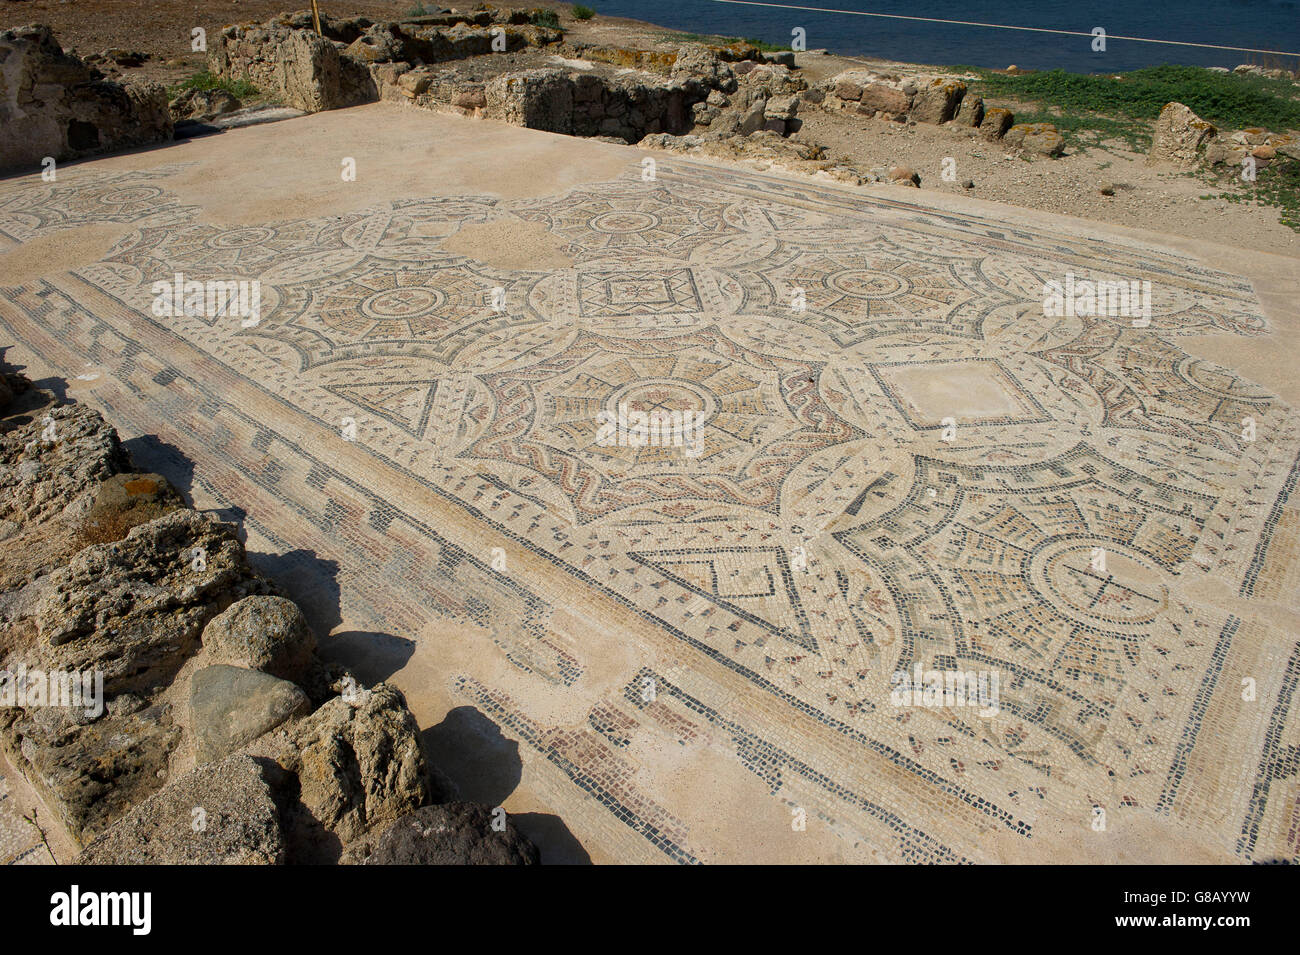 Amphitheatre of the ancient Nora archaeological site, near Pula, Sardinia, Italy Stock Photo